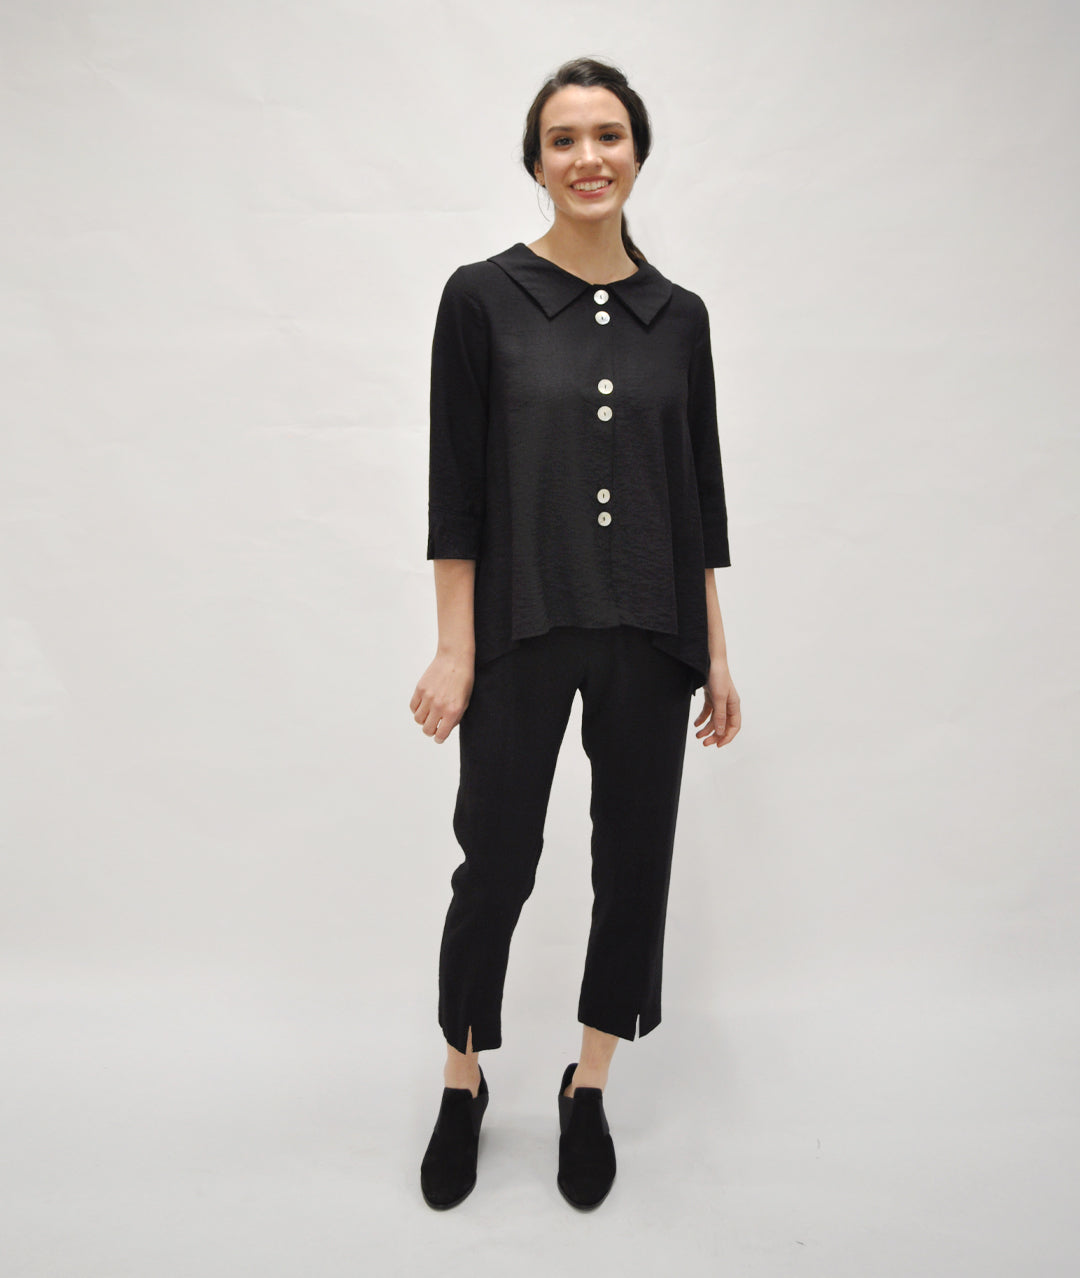 model in a slim black pant with a black button up blouse